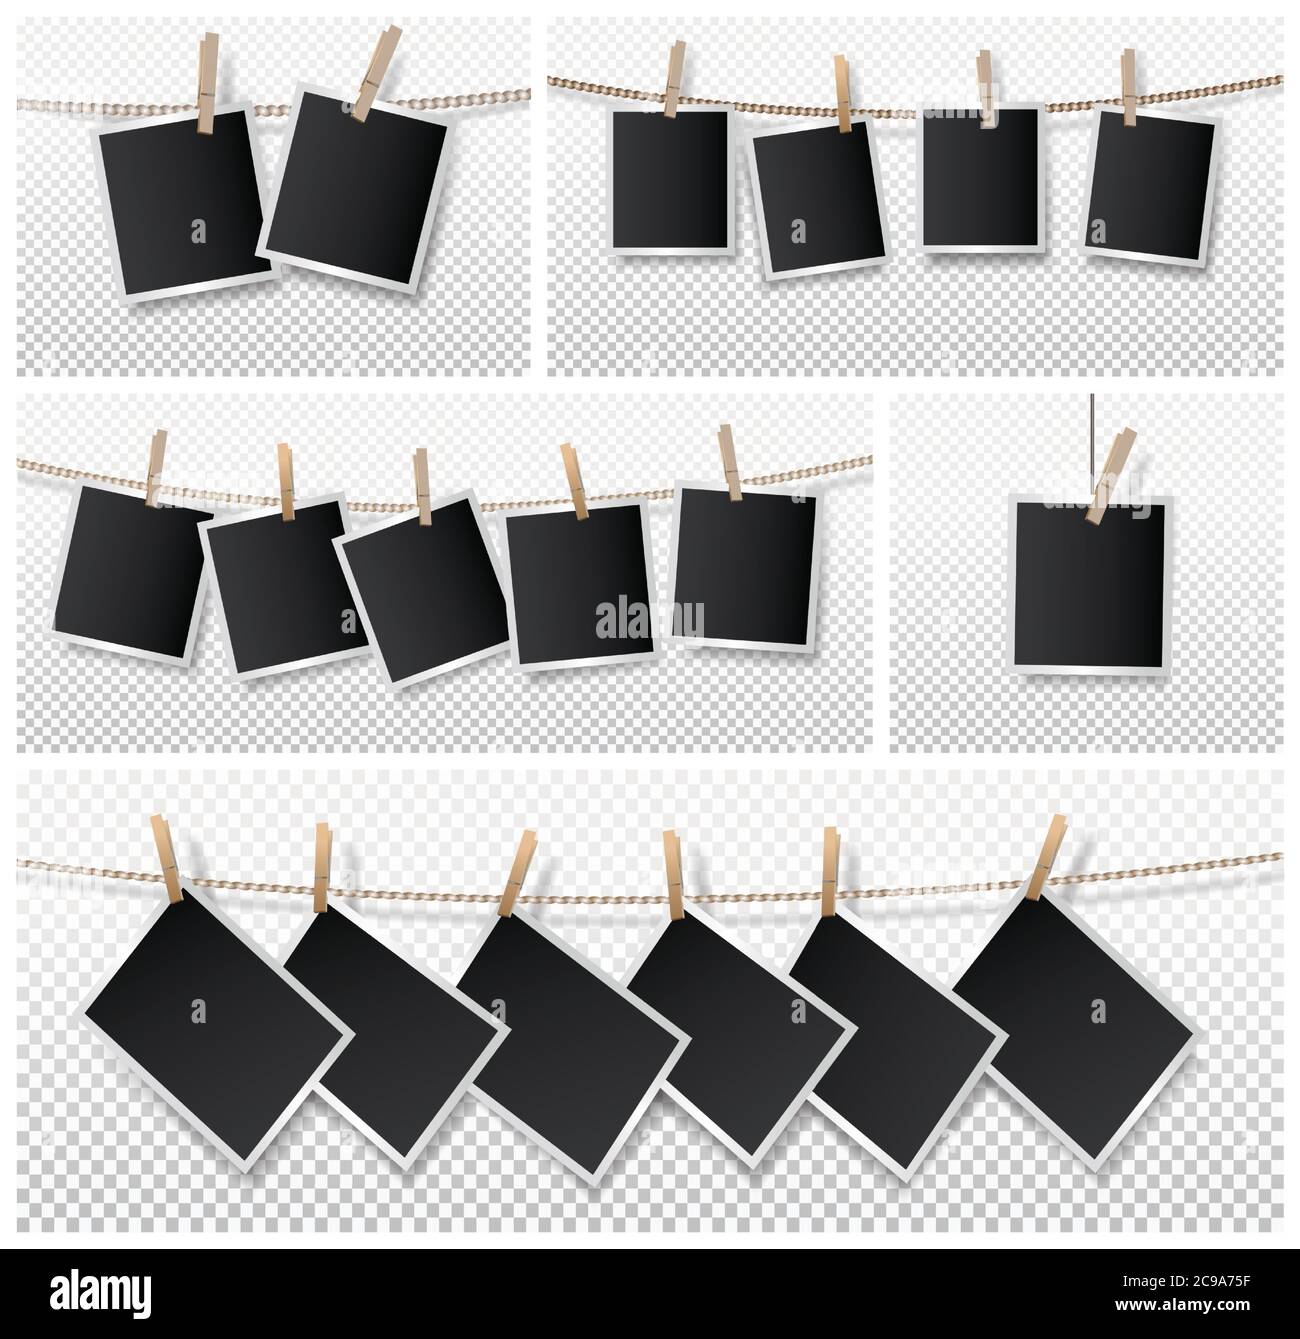 Set of blank photo frame set hanging on rope. Realistic detailed photo icon design template. Vector illustration isolated on transparent background. Stock Vector